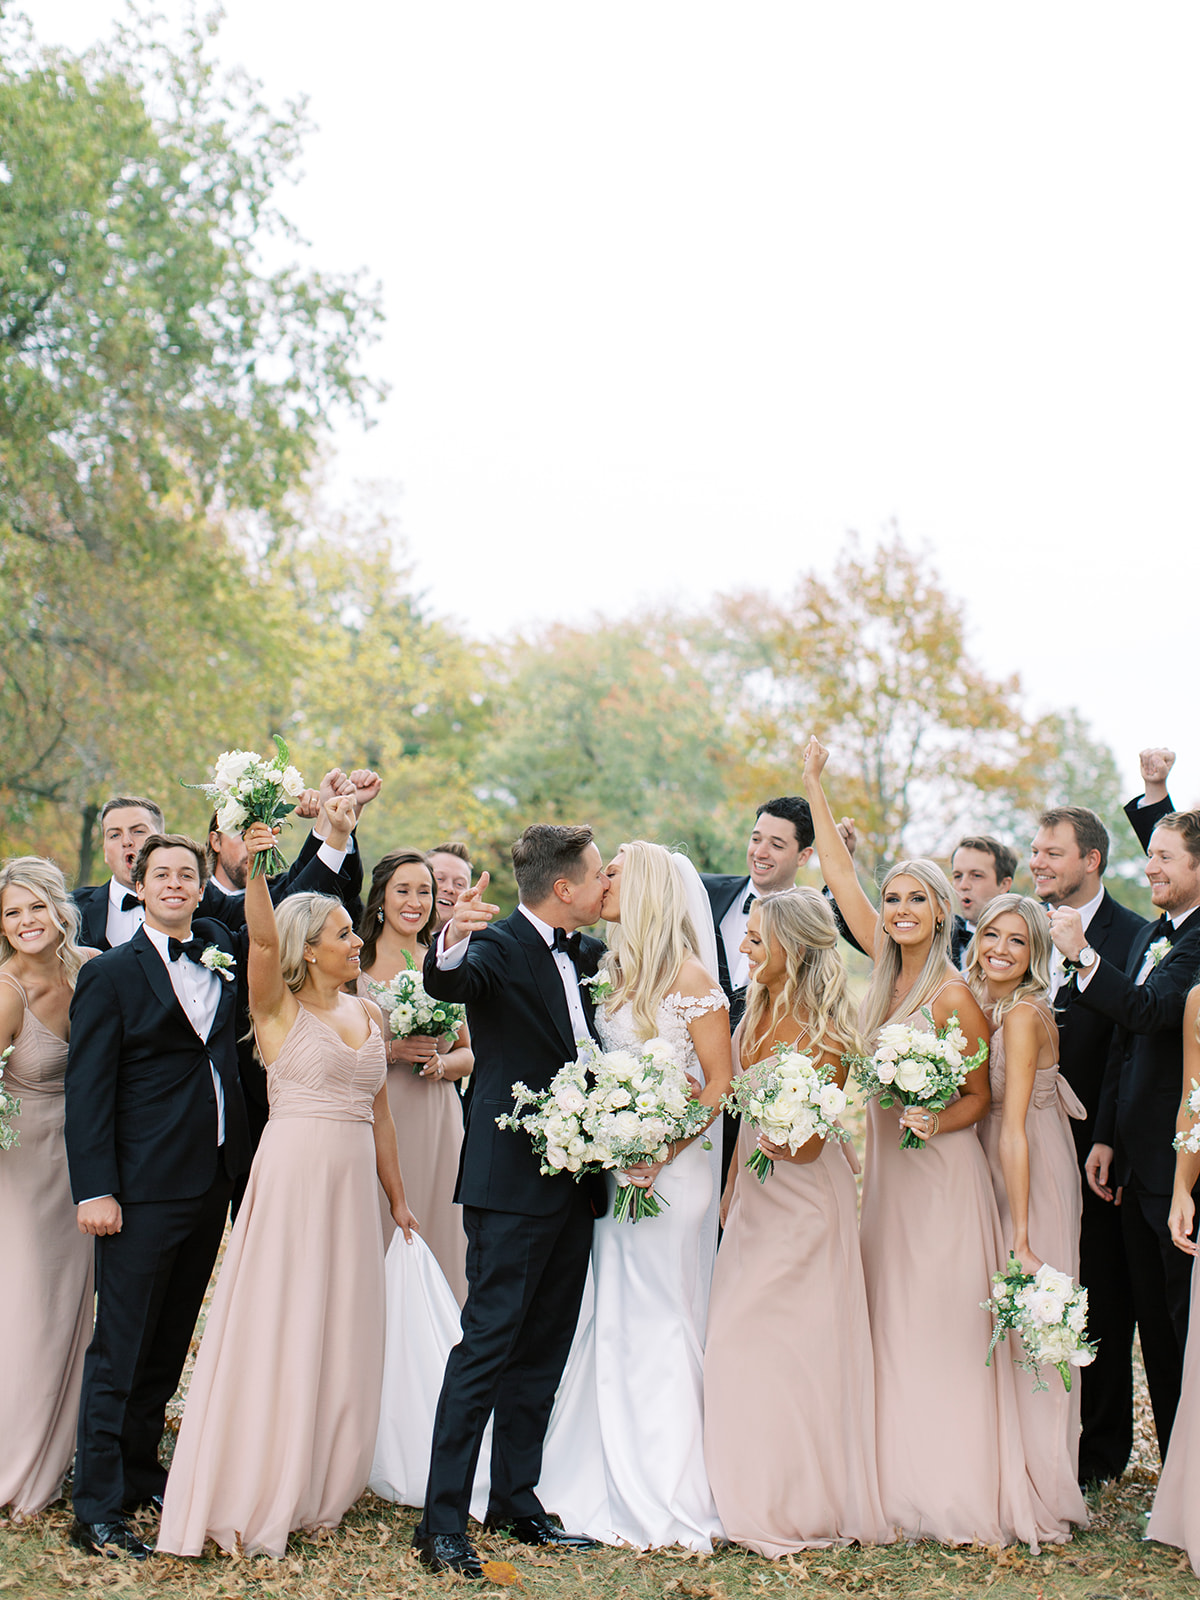 Bridal party cheering on bride and groom kissing